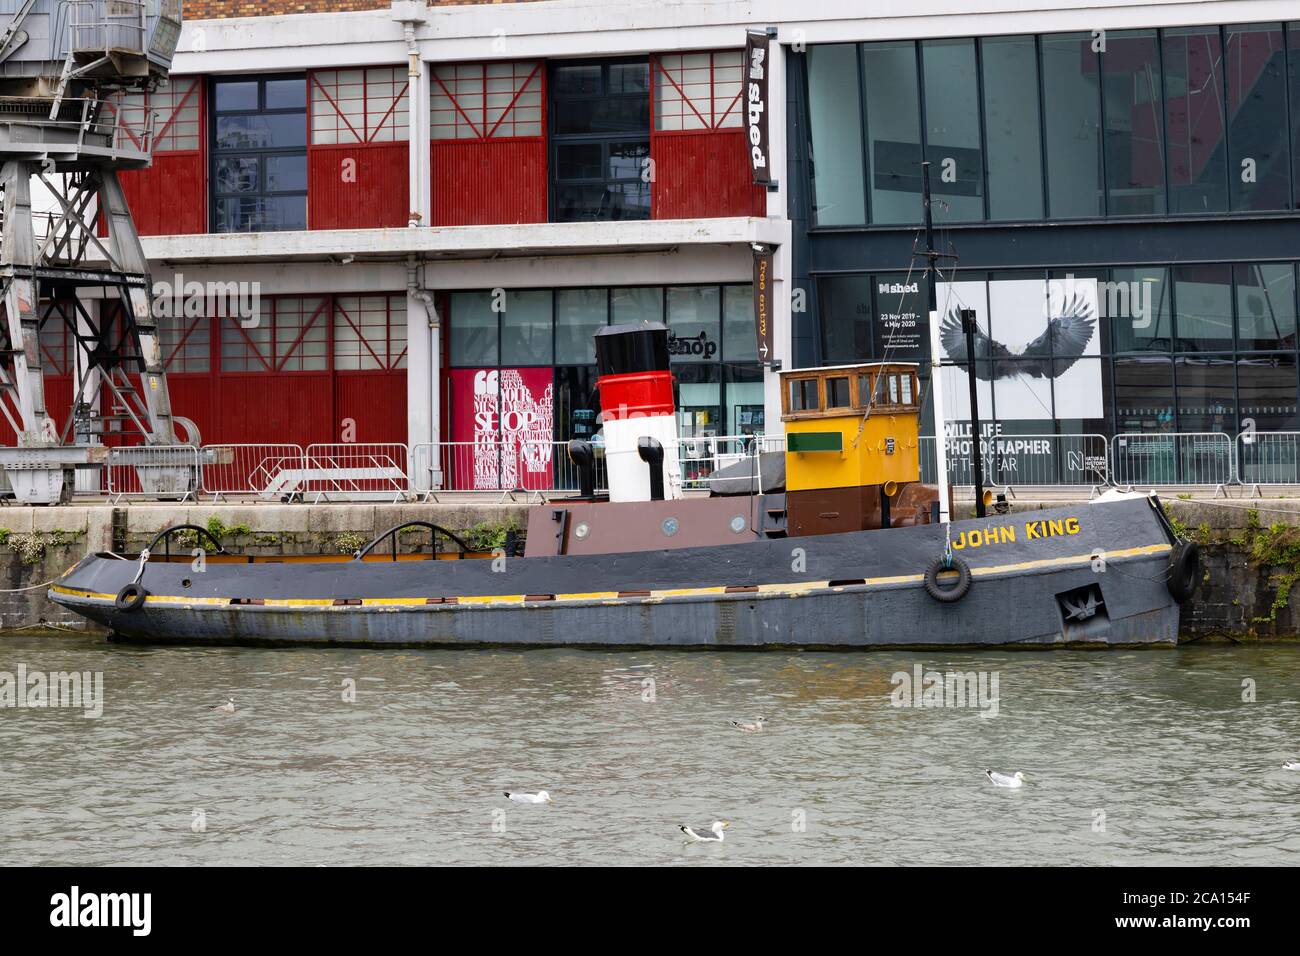 Tugboat, John King moored at the M Shed on Princes Quay, Bristol England. July 2020 Stock Photo